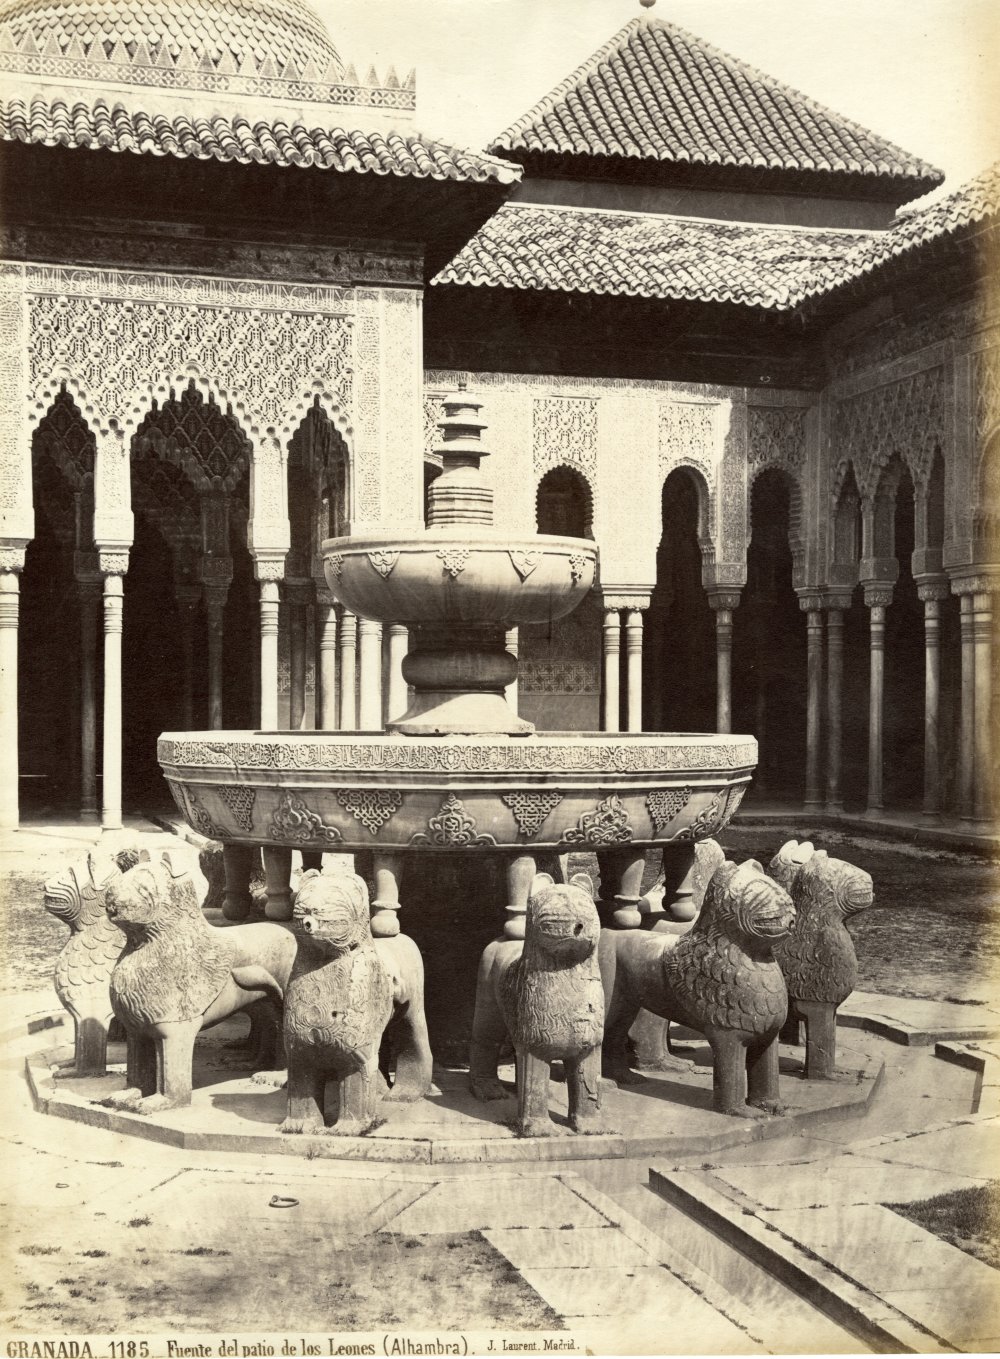 Water jet of the second basin of the Fountain of the Lions, 1837 